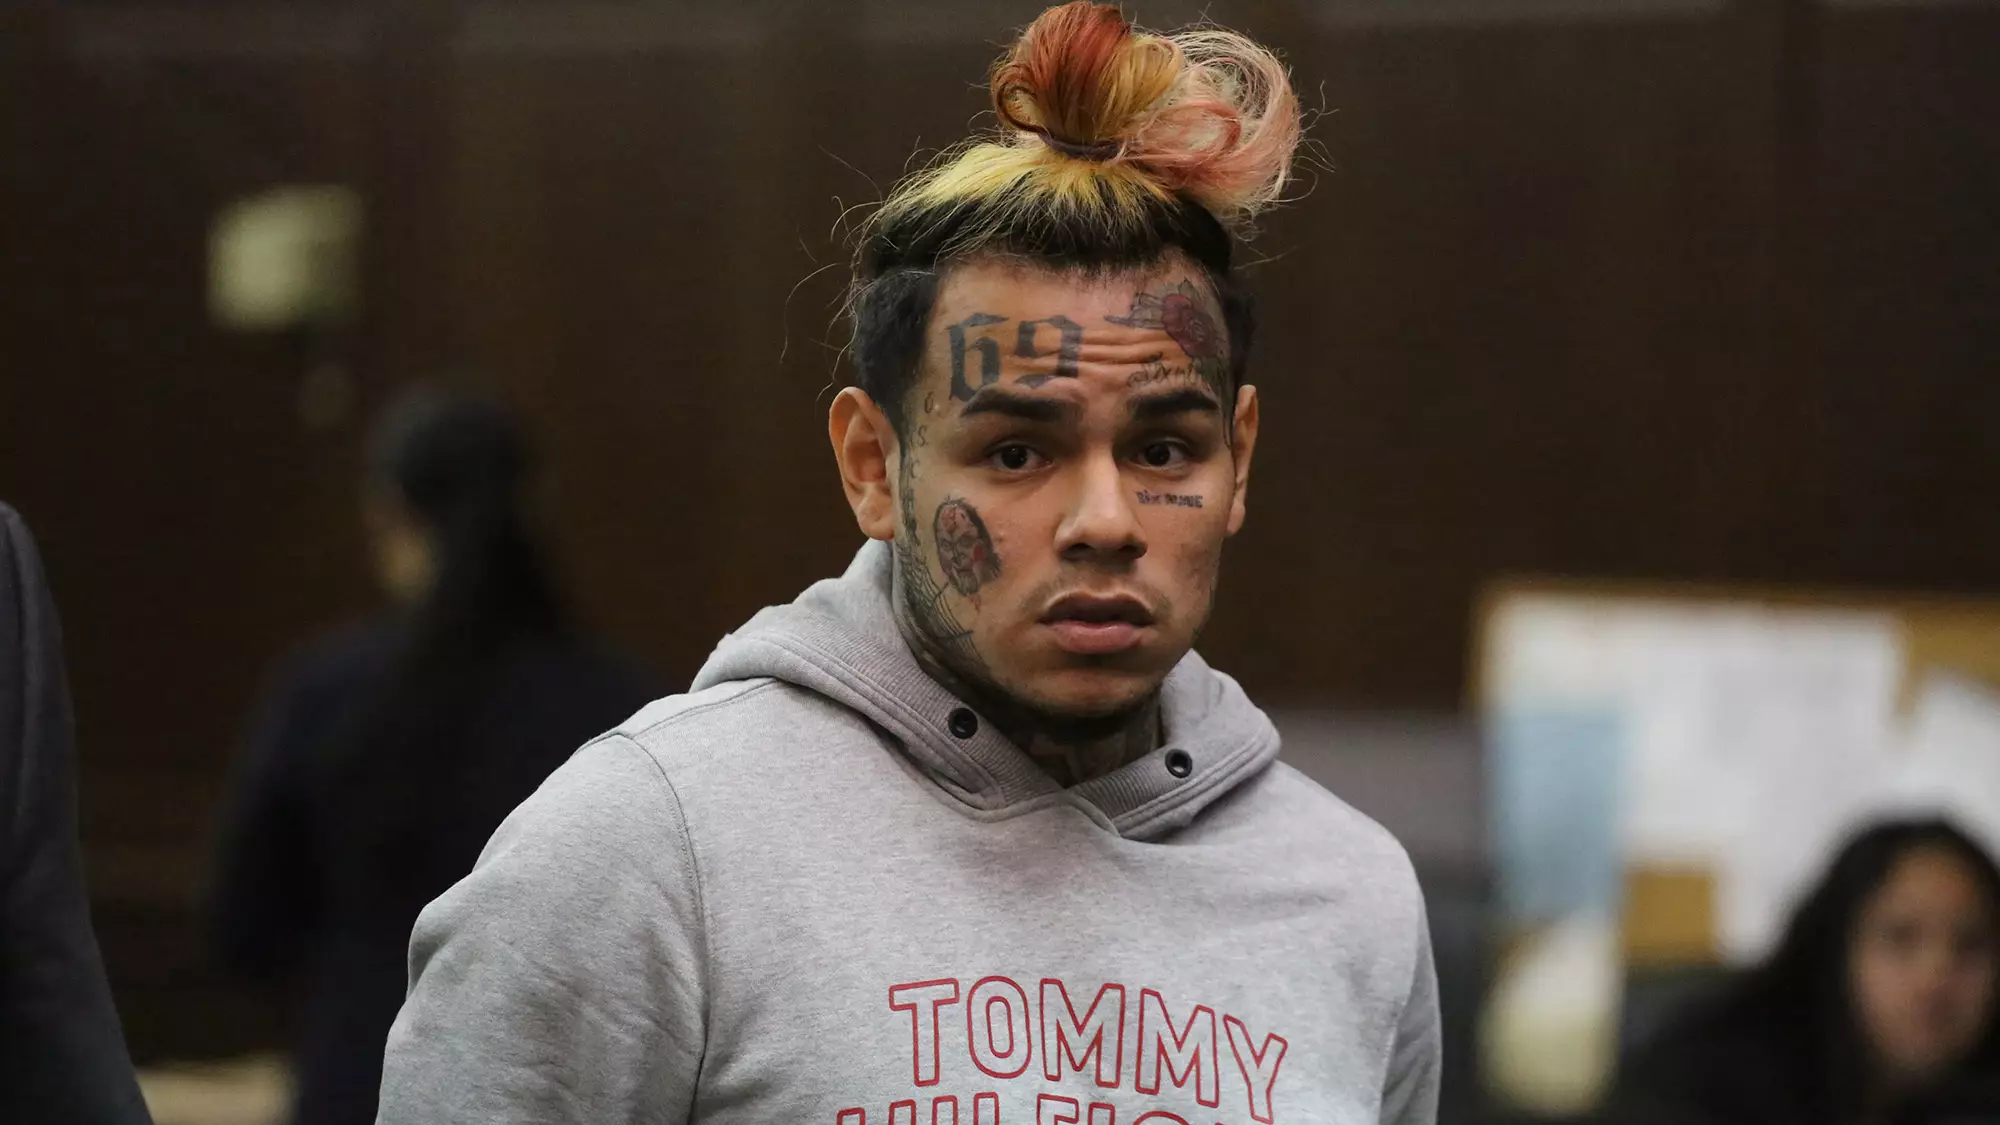 Tekashi 6ix9ine Could Be Released In 2020 After Giving Evidence Against Gang Members